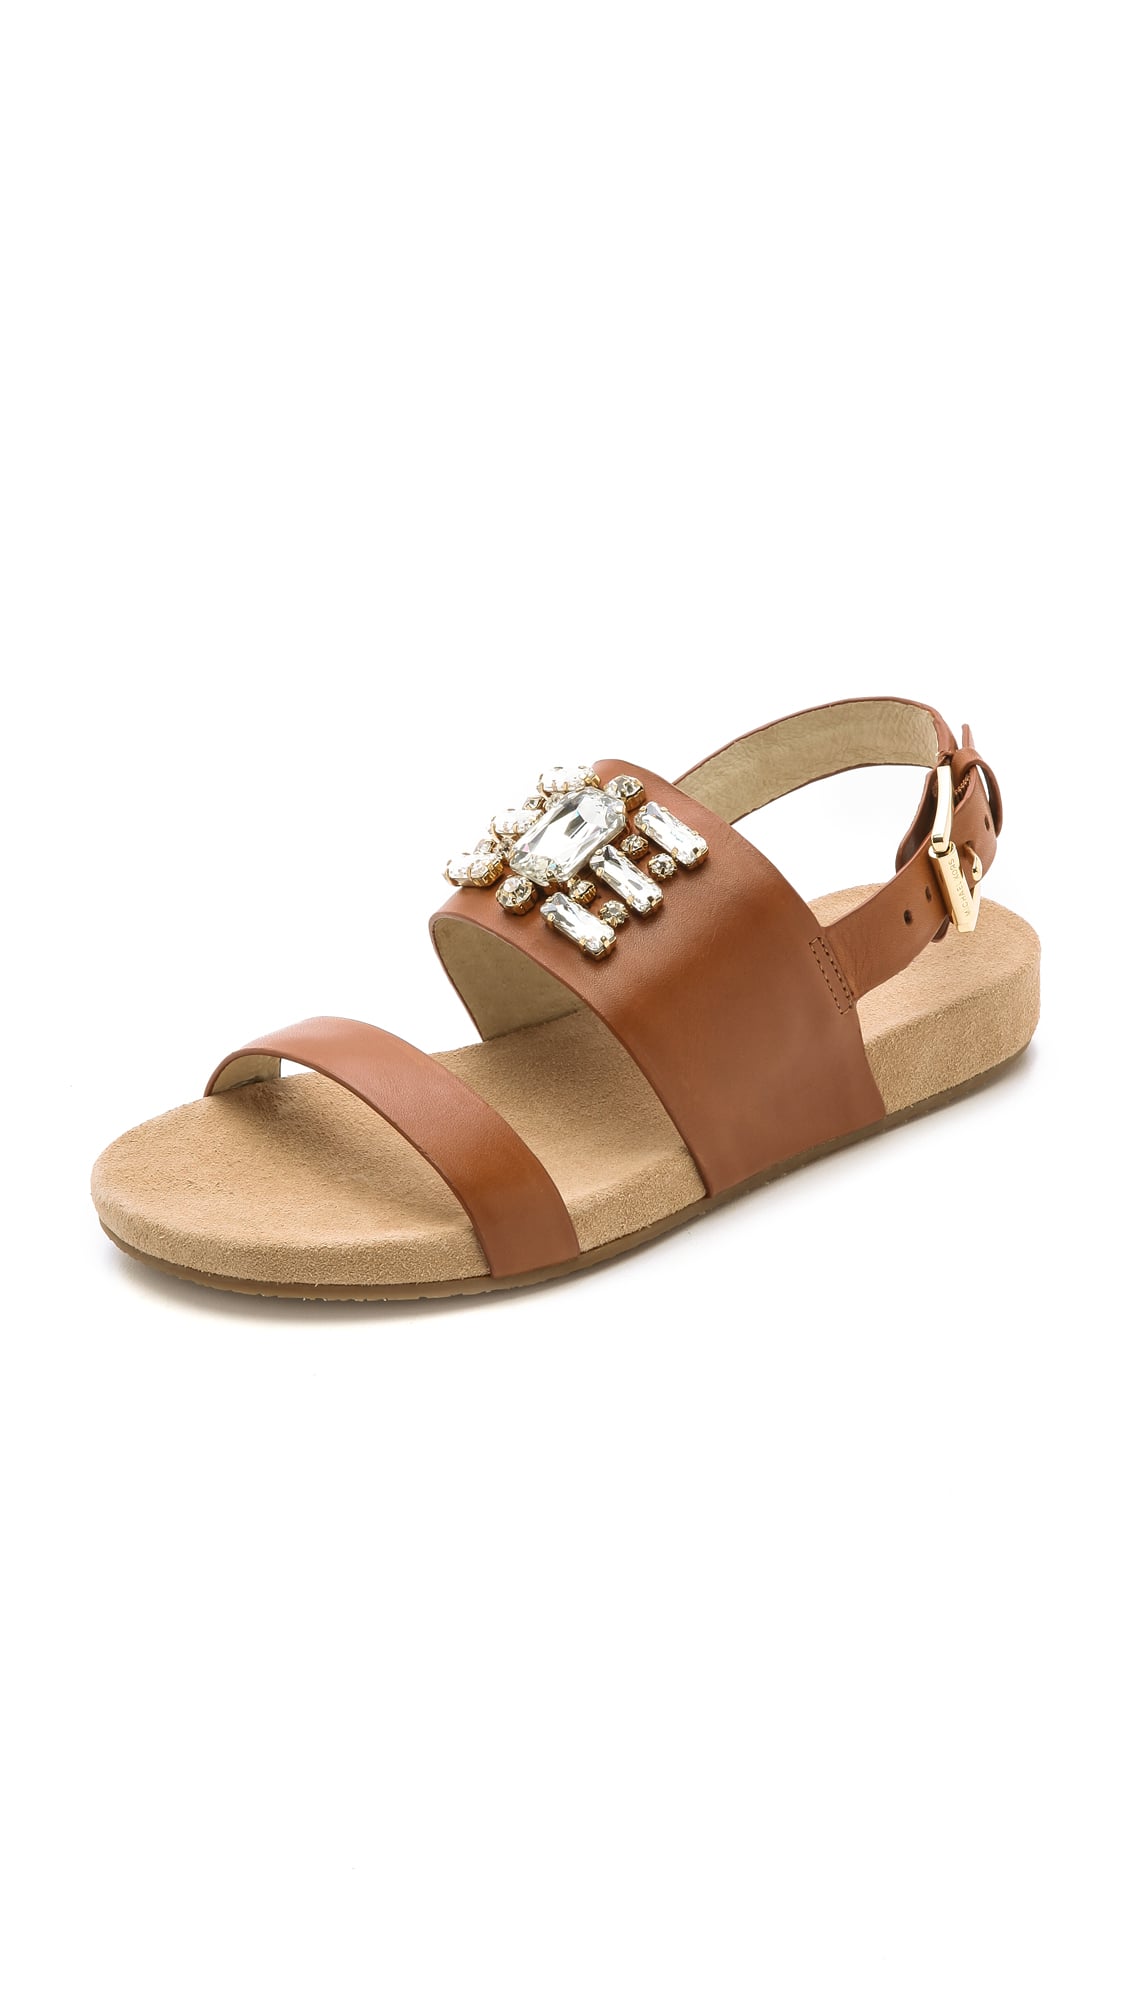 Kors Flat Sandals | 23 That Look Great — and Feel Even Better | POPSUGAR Fashion Photo 6